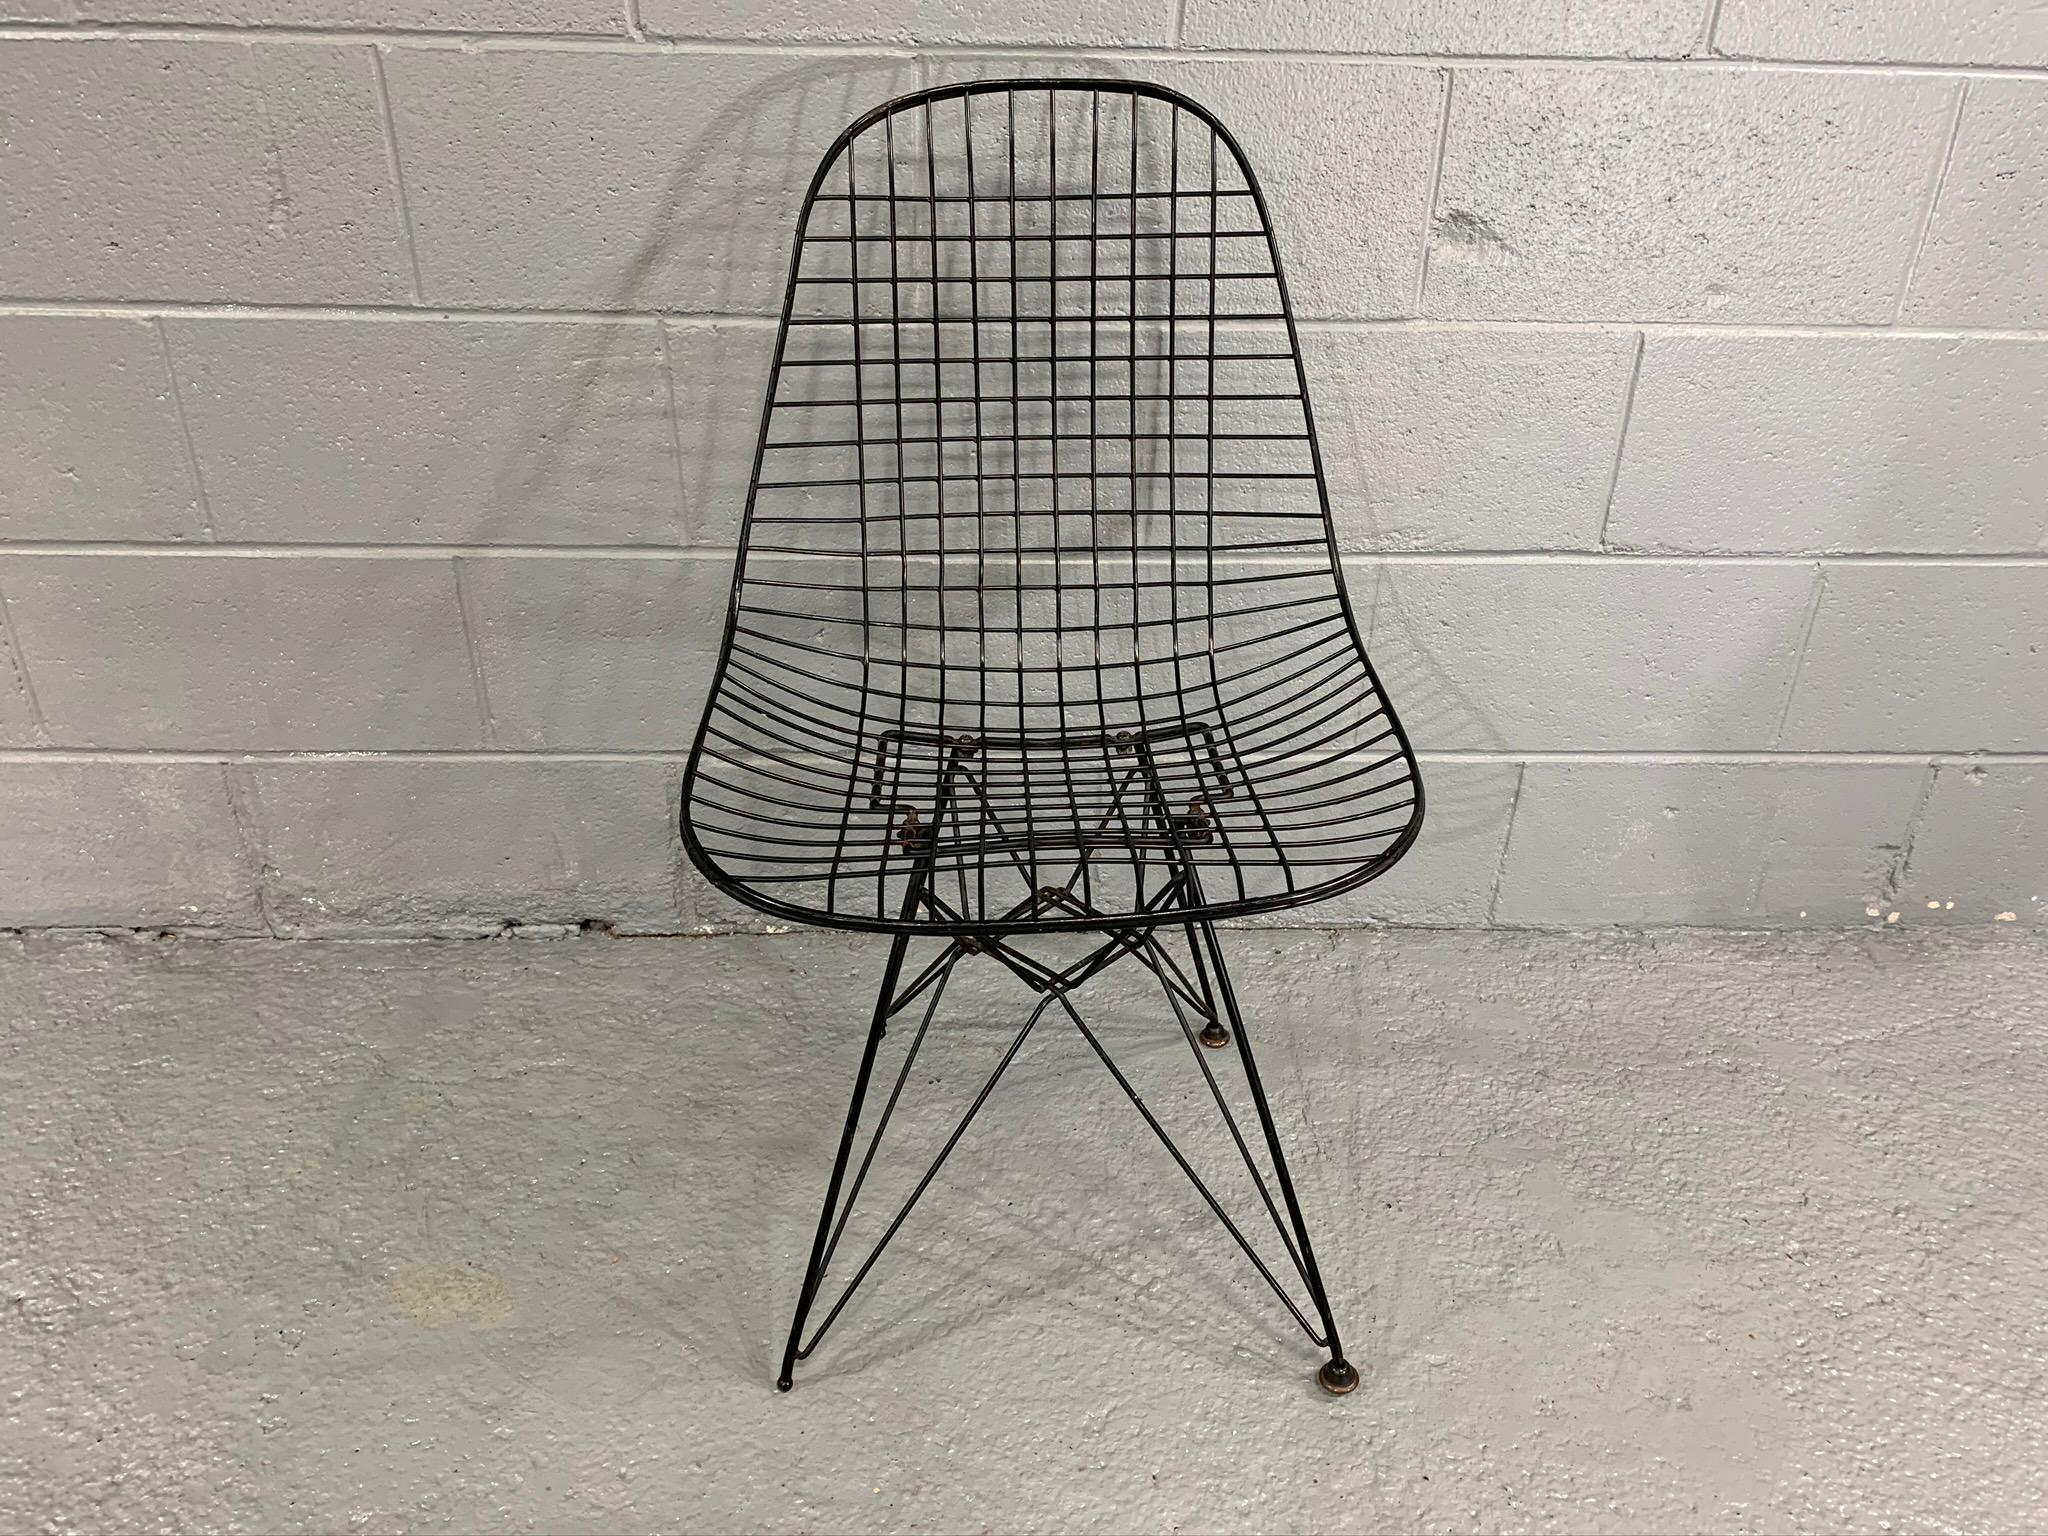 Originally designed in 1951, this is a fine early example of Charles Eames' DKR Eiffel chair for Herman Miller. This design won the Eames' their first American mechanical patent. 

The pedestal base is often referred to as the 